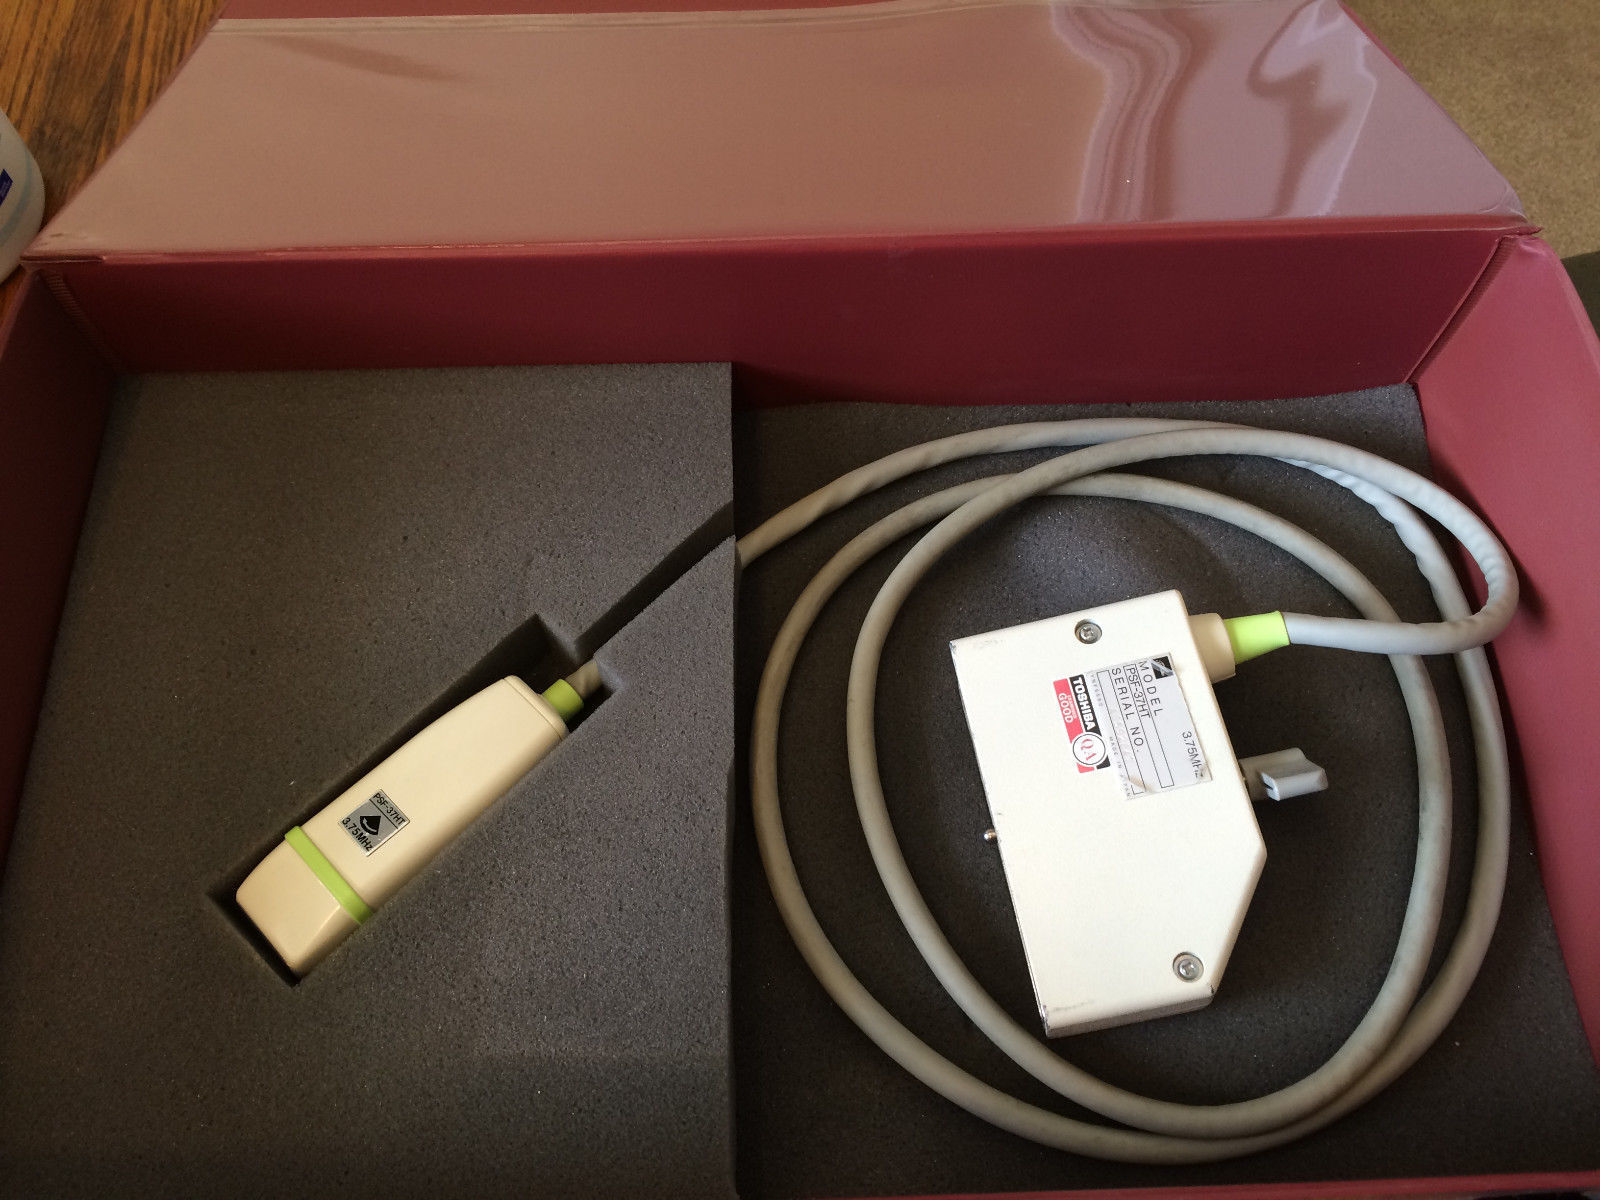 Toshiba PSF-37HT Phased Array Probe DIAGNOSTIC ULTRASOUND MACHINES FOR SALE